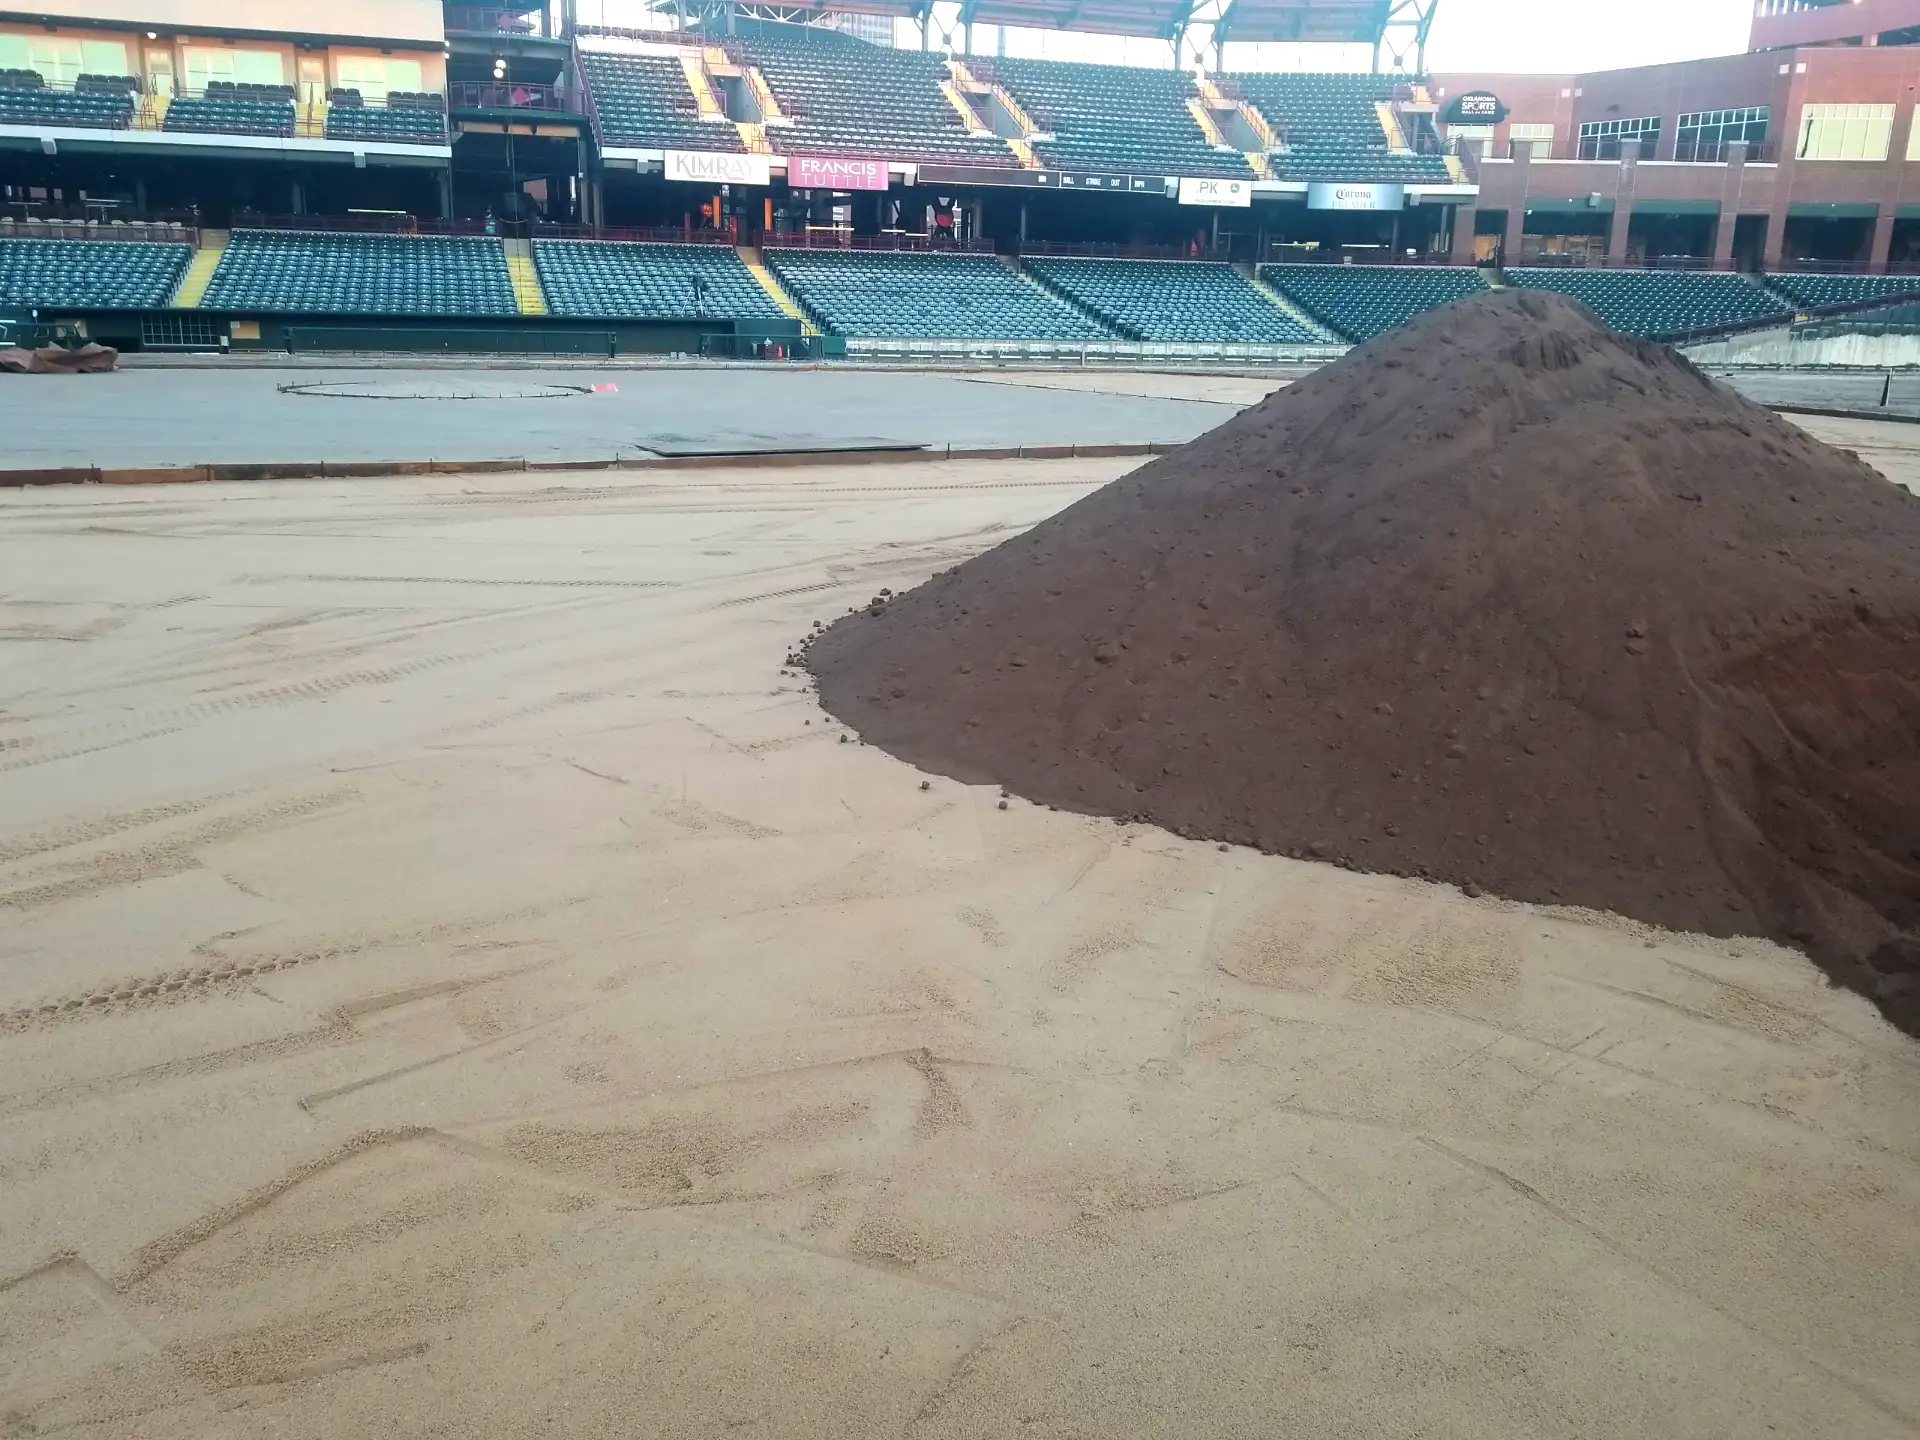 A pile of infield clay ready for use in a sports field.